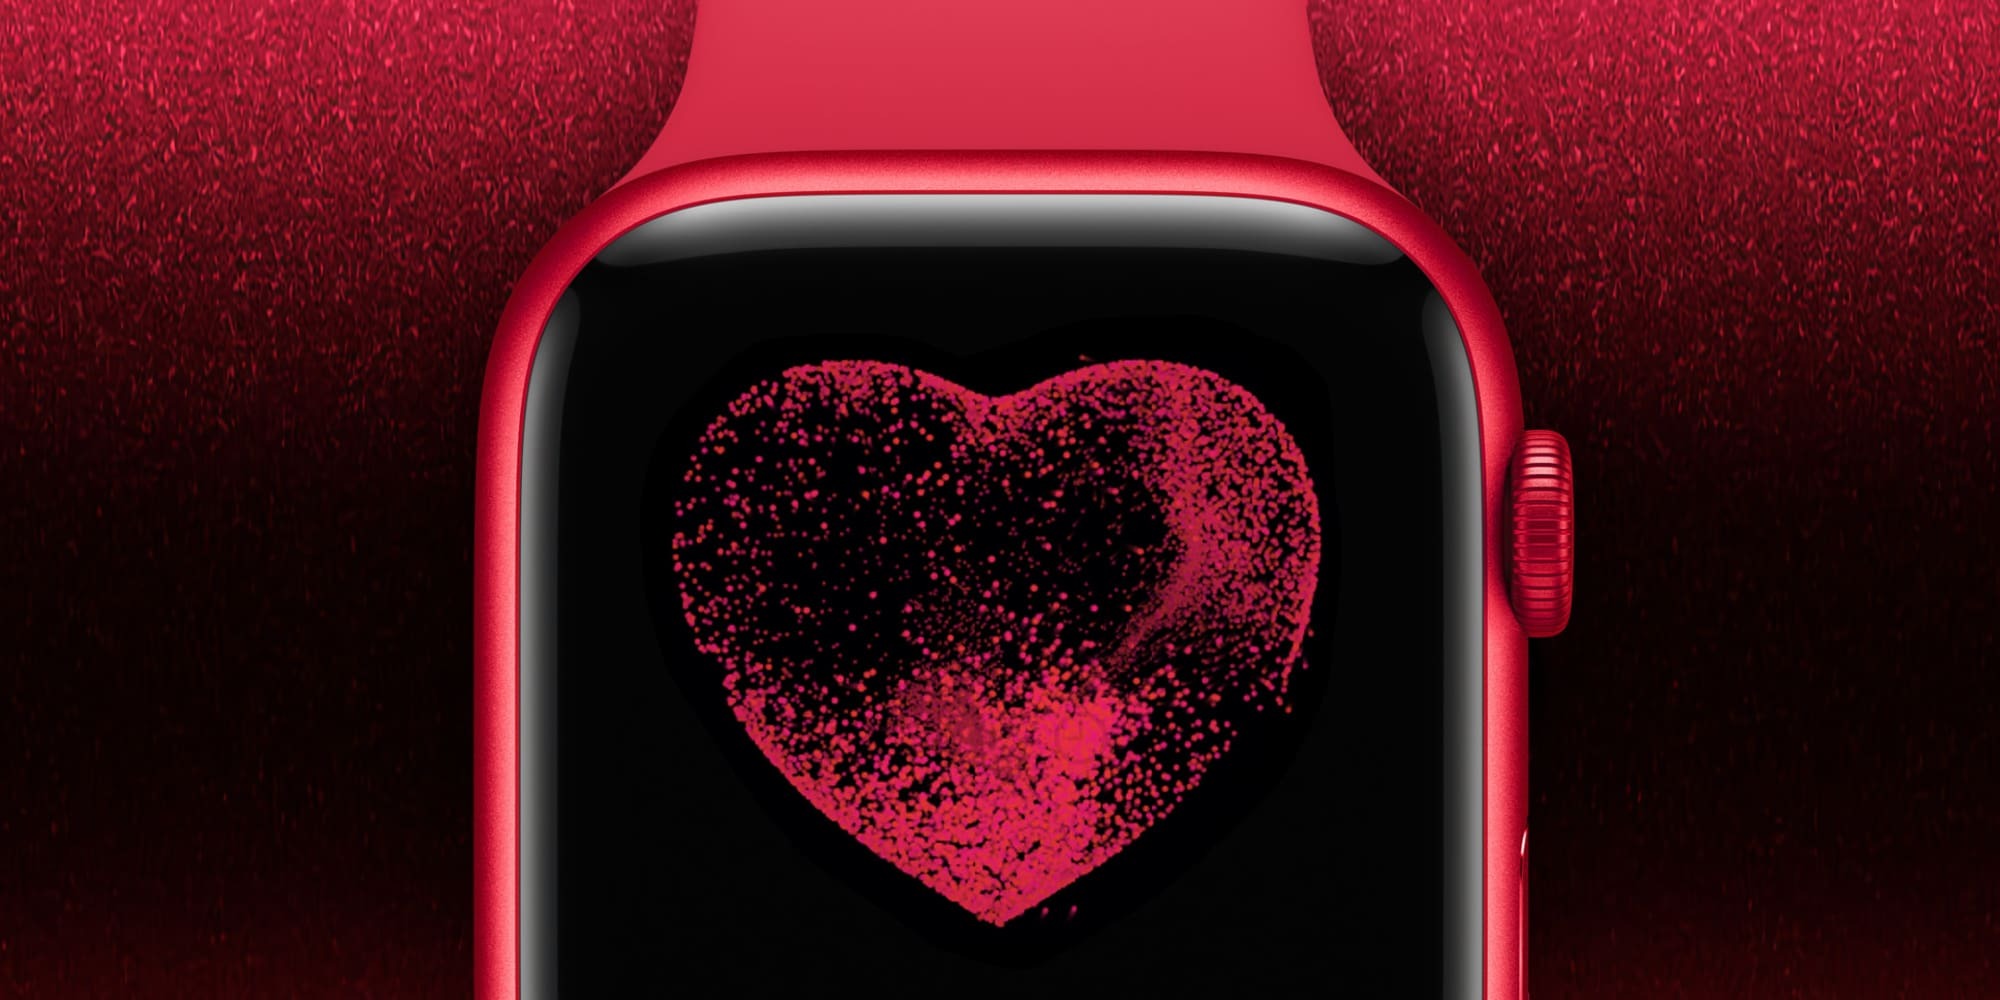 https://9to5mac.com/wp-content/uploads/sites/6/2023/02/heart-health-apple-watch-7-features.jpg?quality=82&strip=all